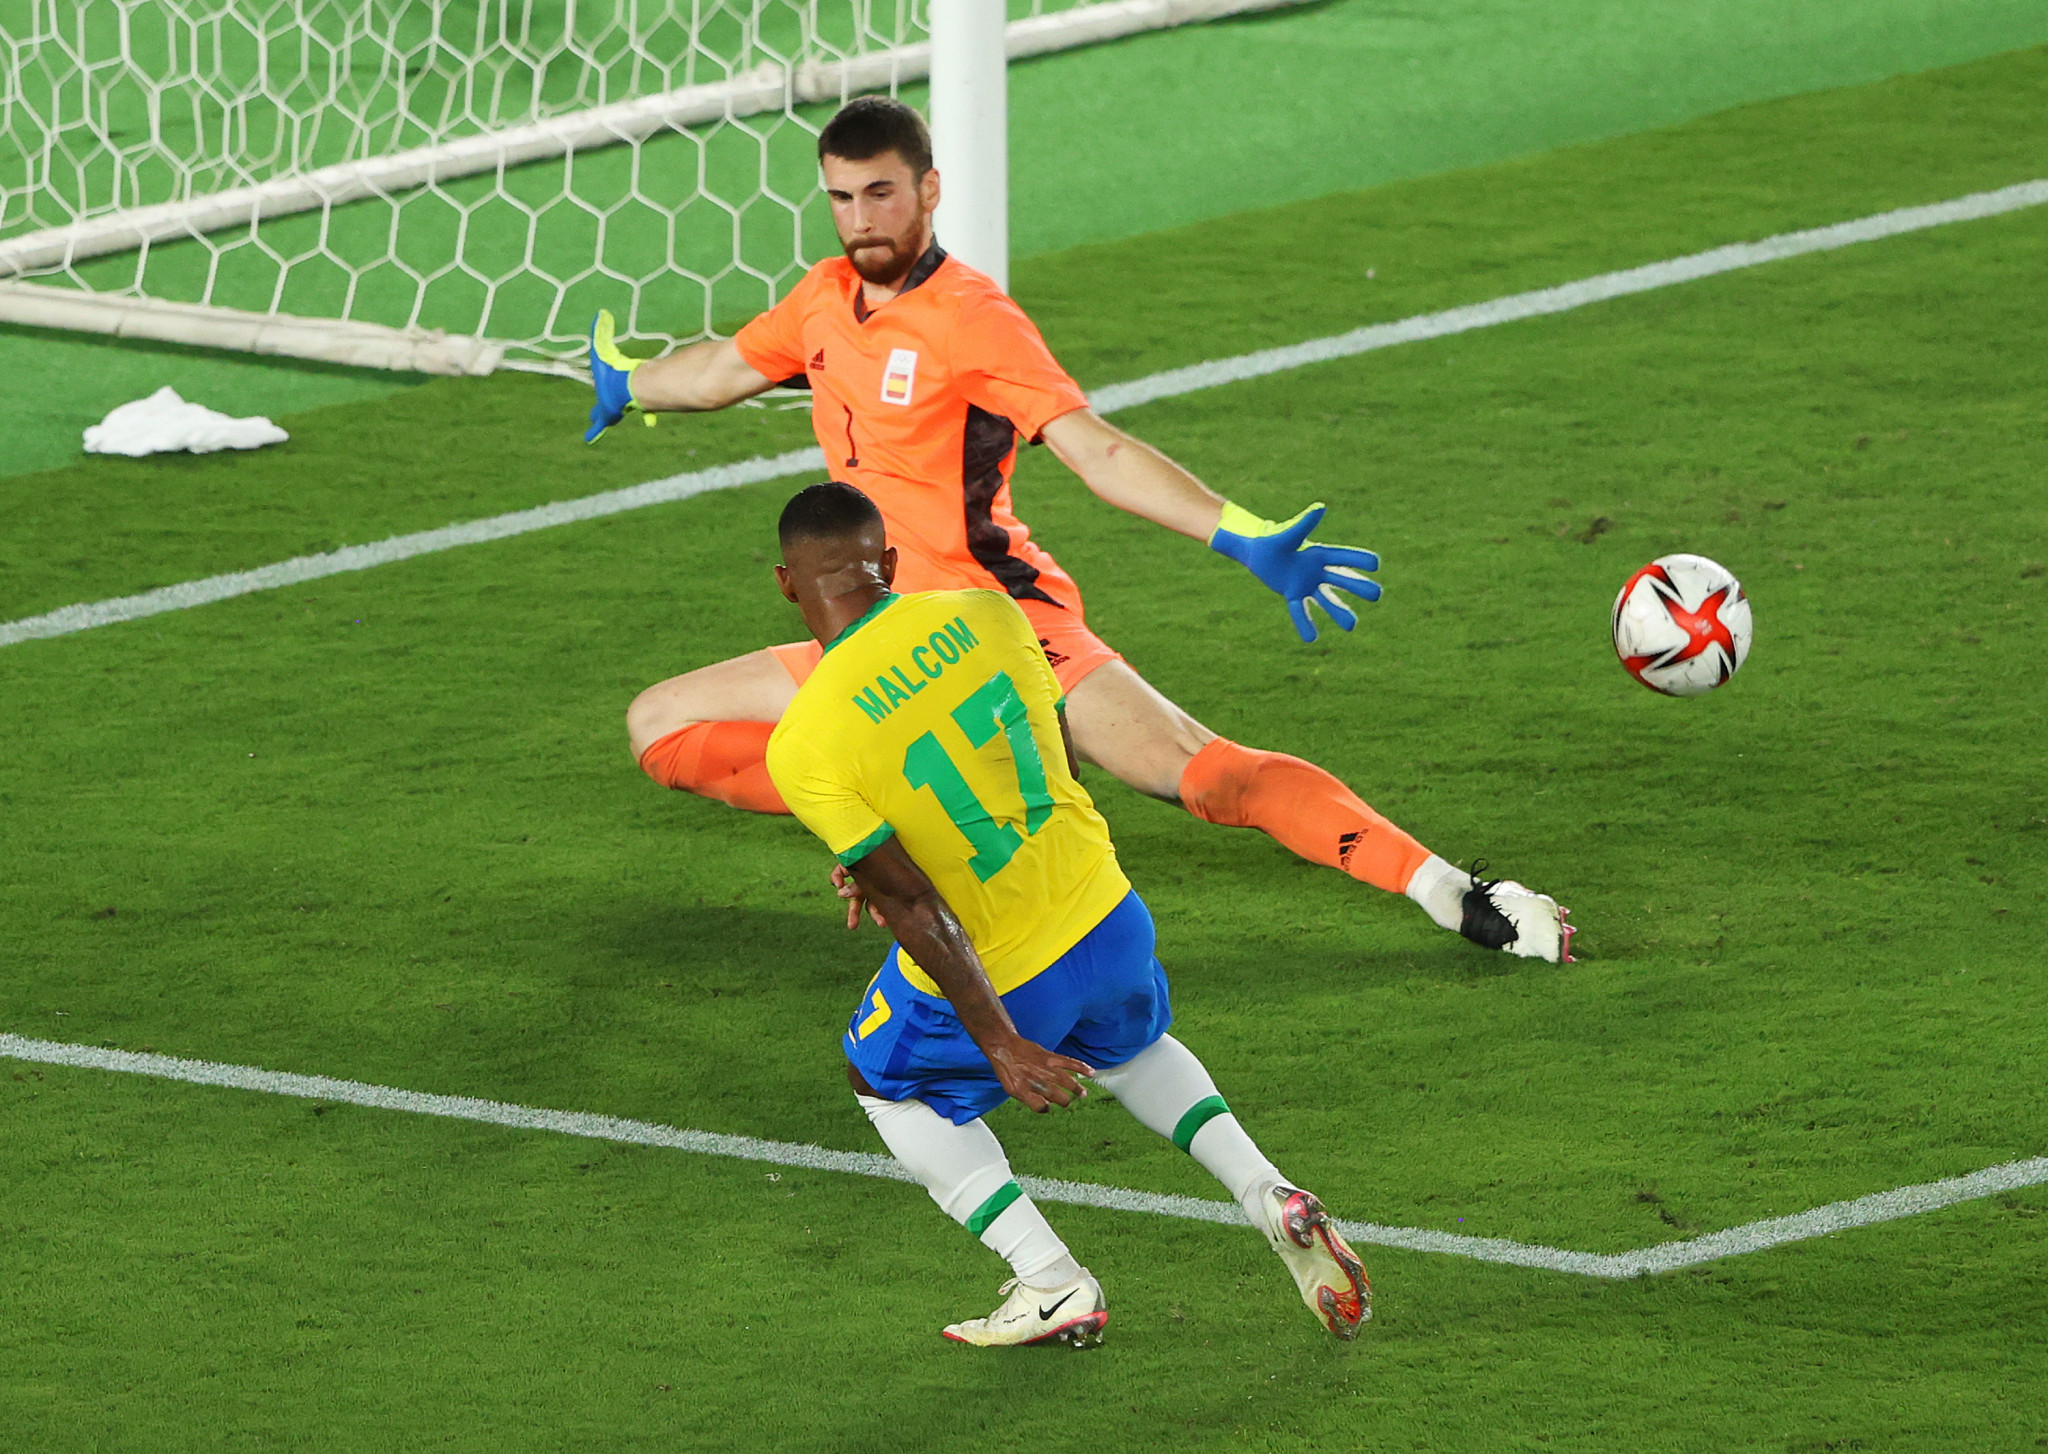 Malcom's extra time goal saw Brazil defeat Spain to win gold in the men's football competition ©Getty Images